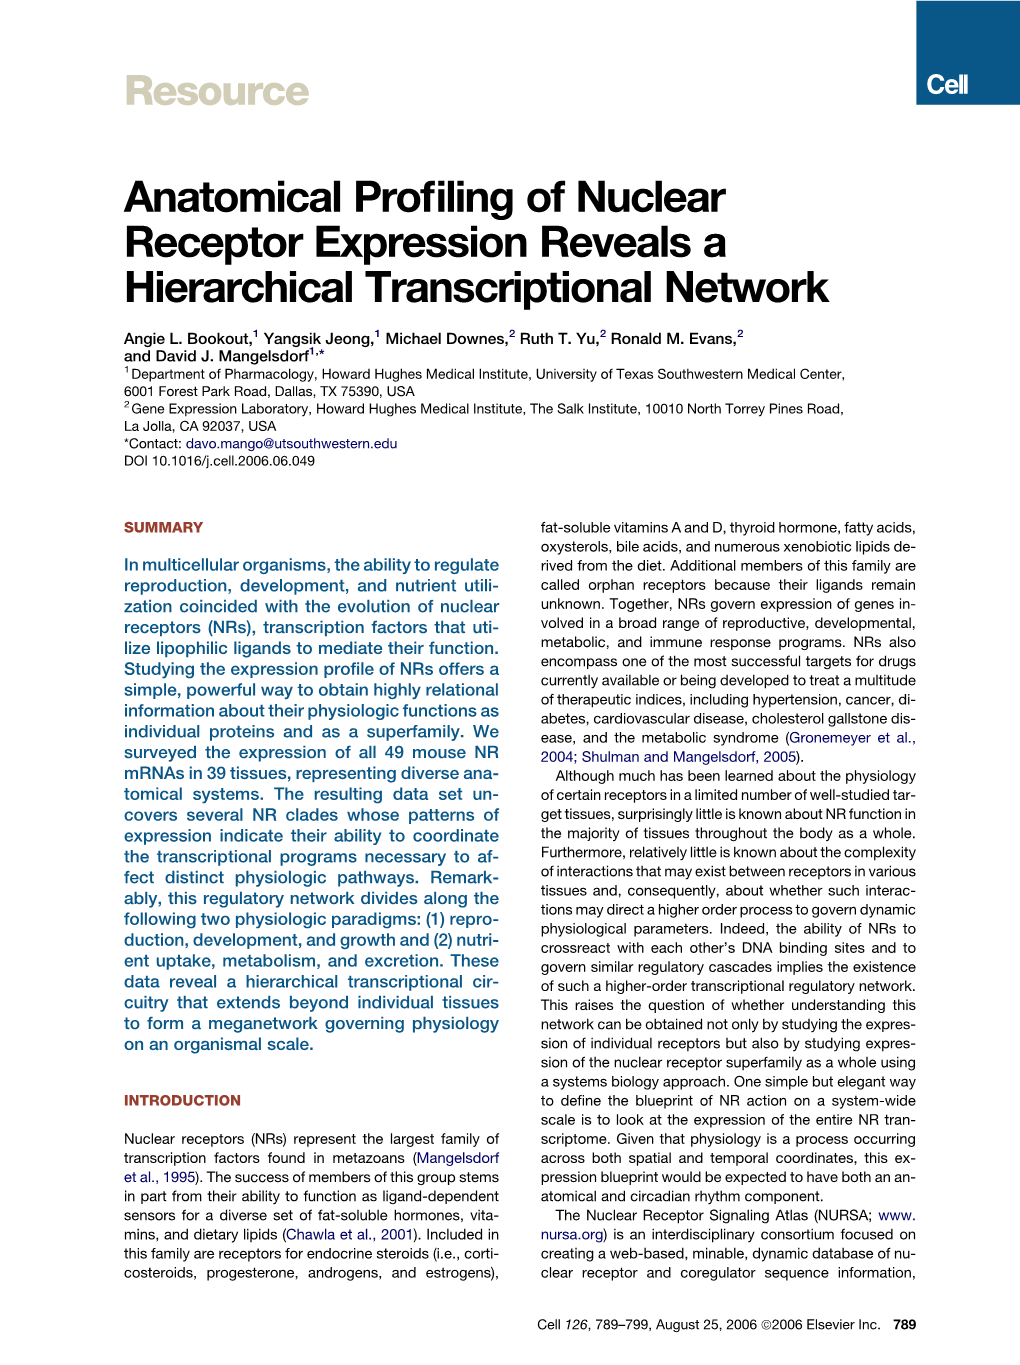 Anatomical Profiling of Nuclear Receptor Expression Reveals A